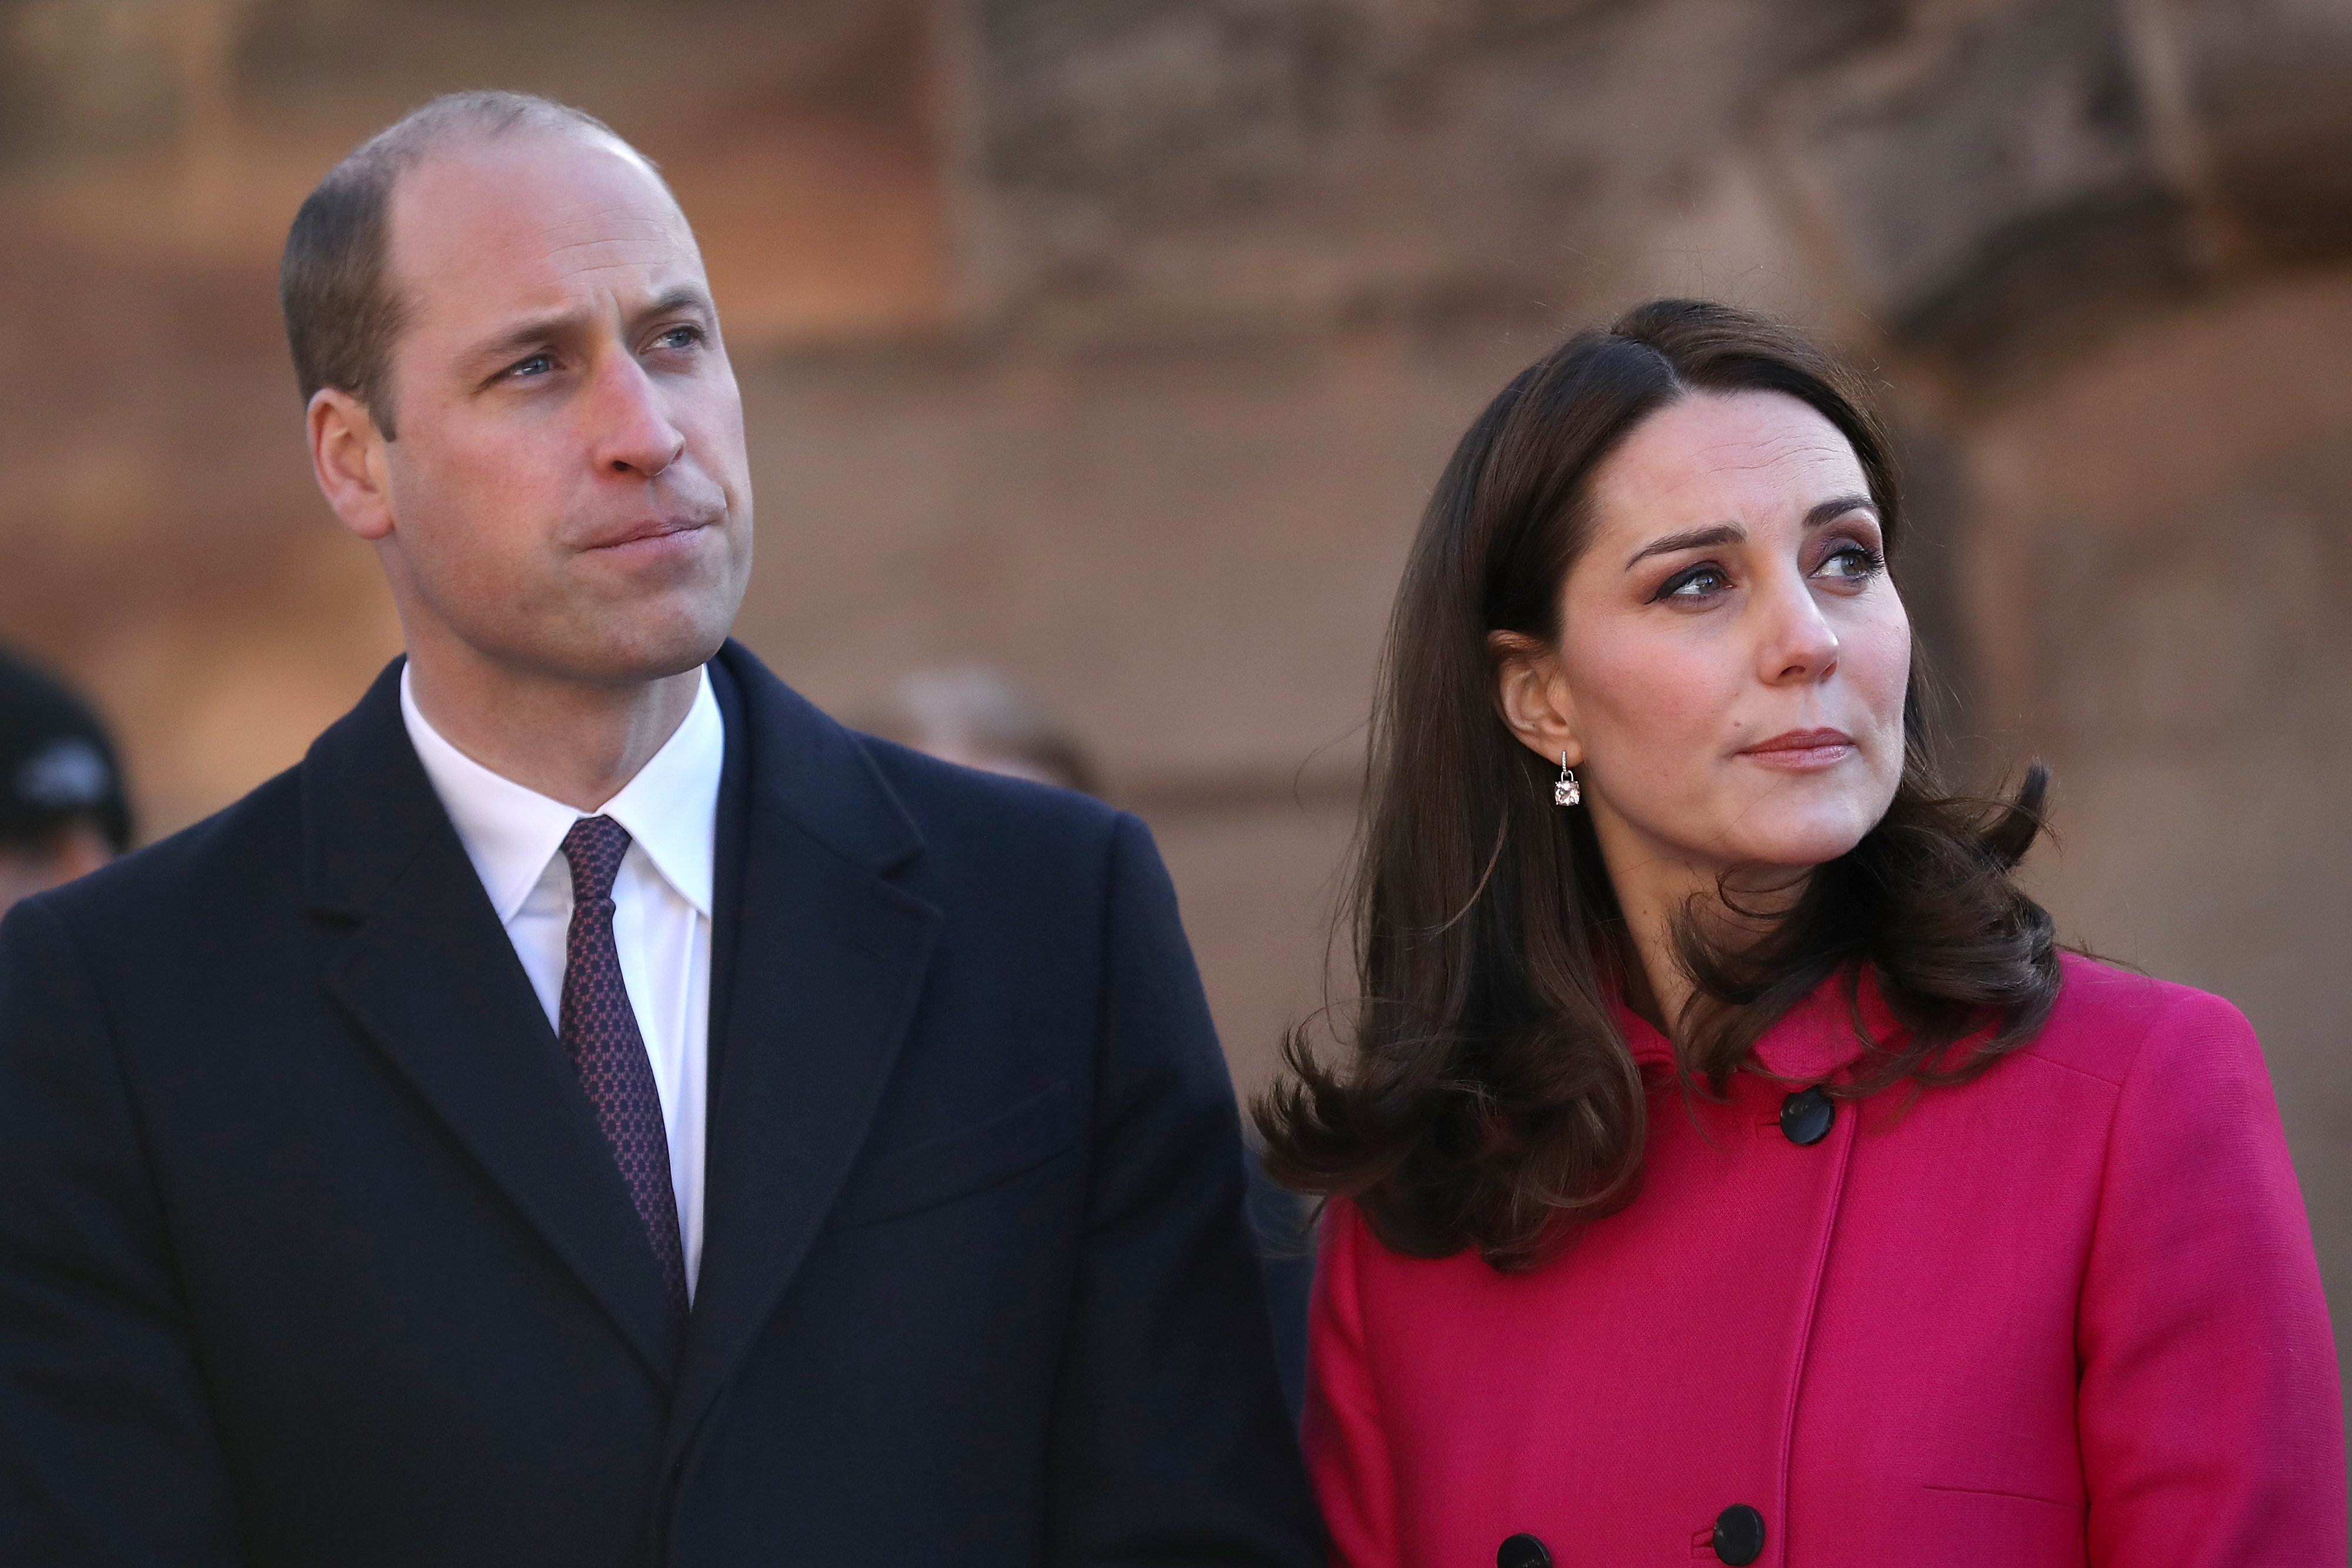 Prince William and his wife, Kate Middleton, arriving for their visit to Coventry Cathedral during their visit to the city on January 16, 2018 in Coventry, England. / Source: Getty Images